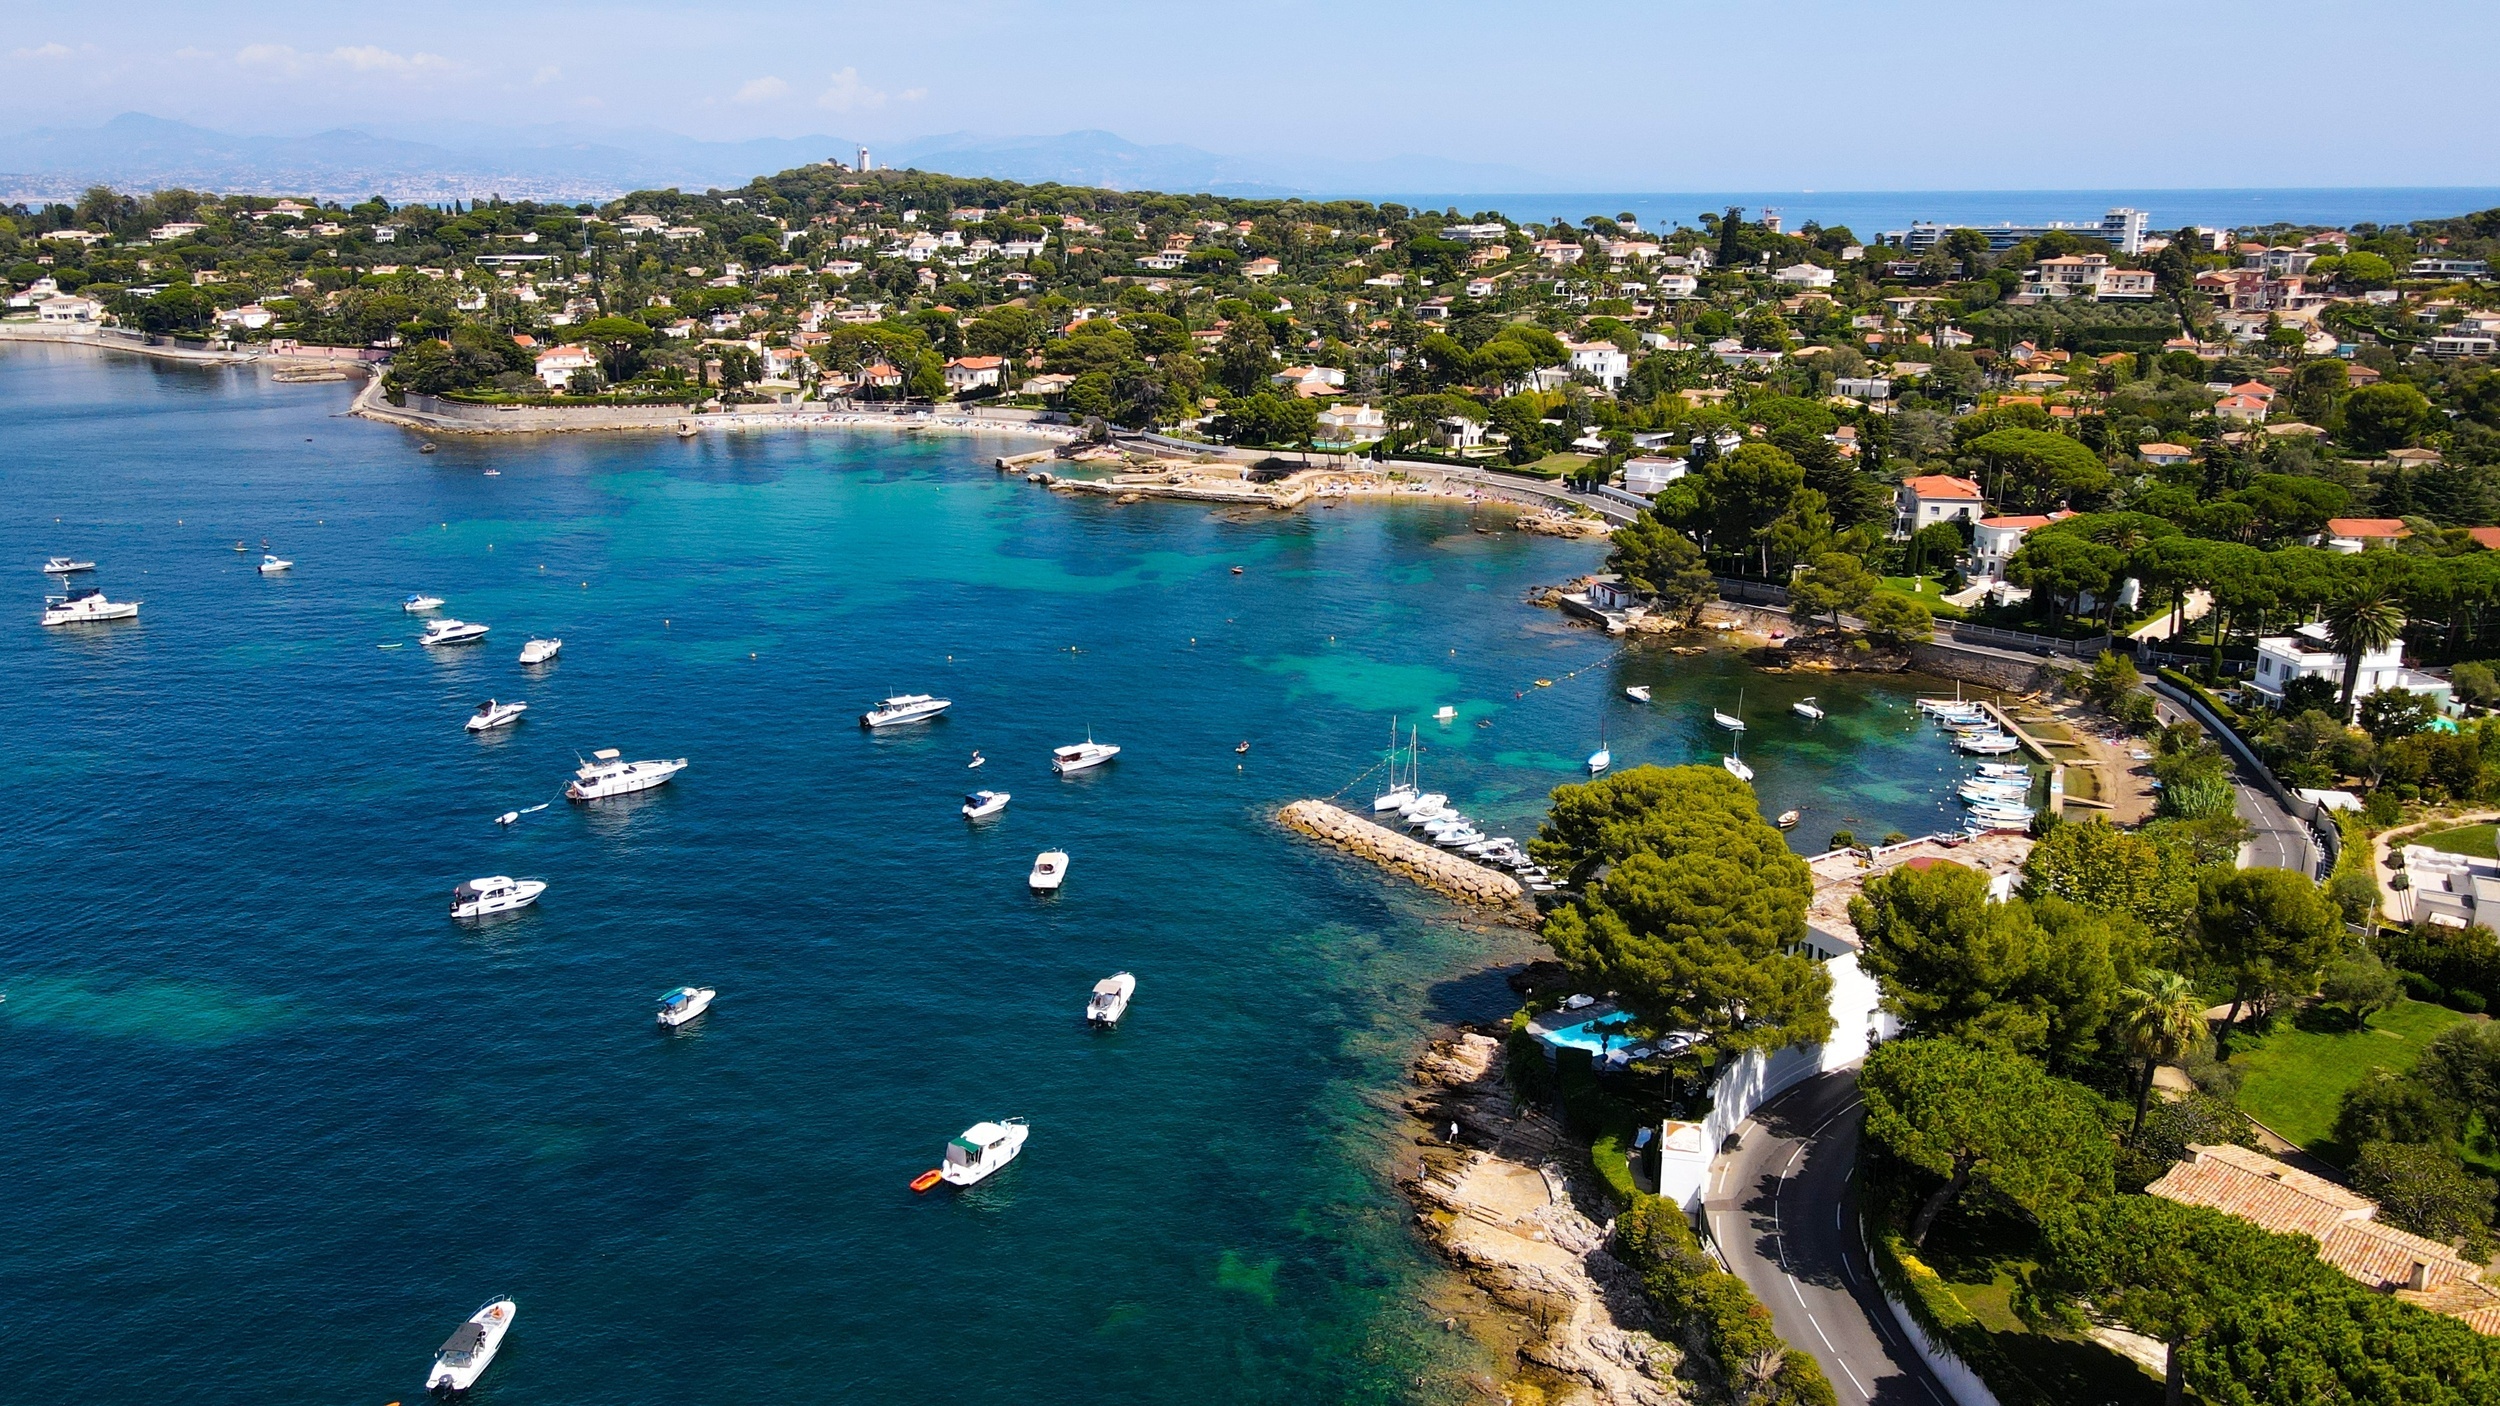 <p>Most visitors to the Cote d’Azur head for the larger cities, such as Nice or Cannes. However, Antibes, located between both, is the perfect place to truly relax. The Old Town is magnificent, with ramparts that provide epic views of the sea and the nearby peninsula with centuries-old mansions.</p><p>You may also like: <a href='https://www.yardbarker.com/lifestyle/articles/22_most_epic_waterfalls_in_the_united_states_010424/s1__38973572'>22 most epic waterfalls in the United States</a></p>